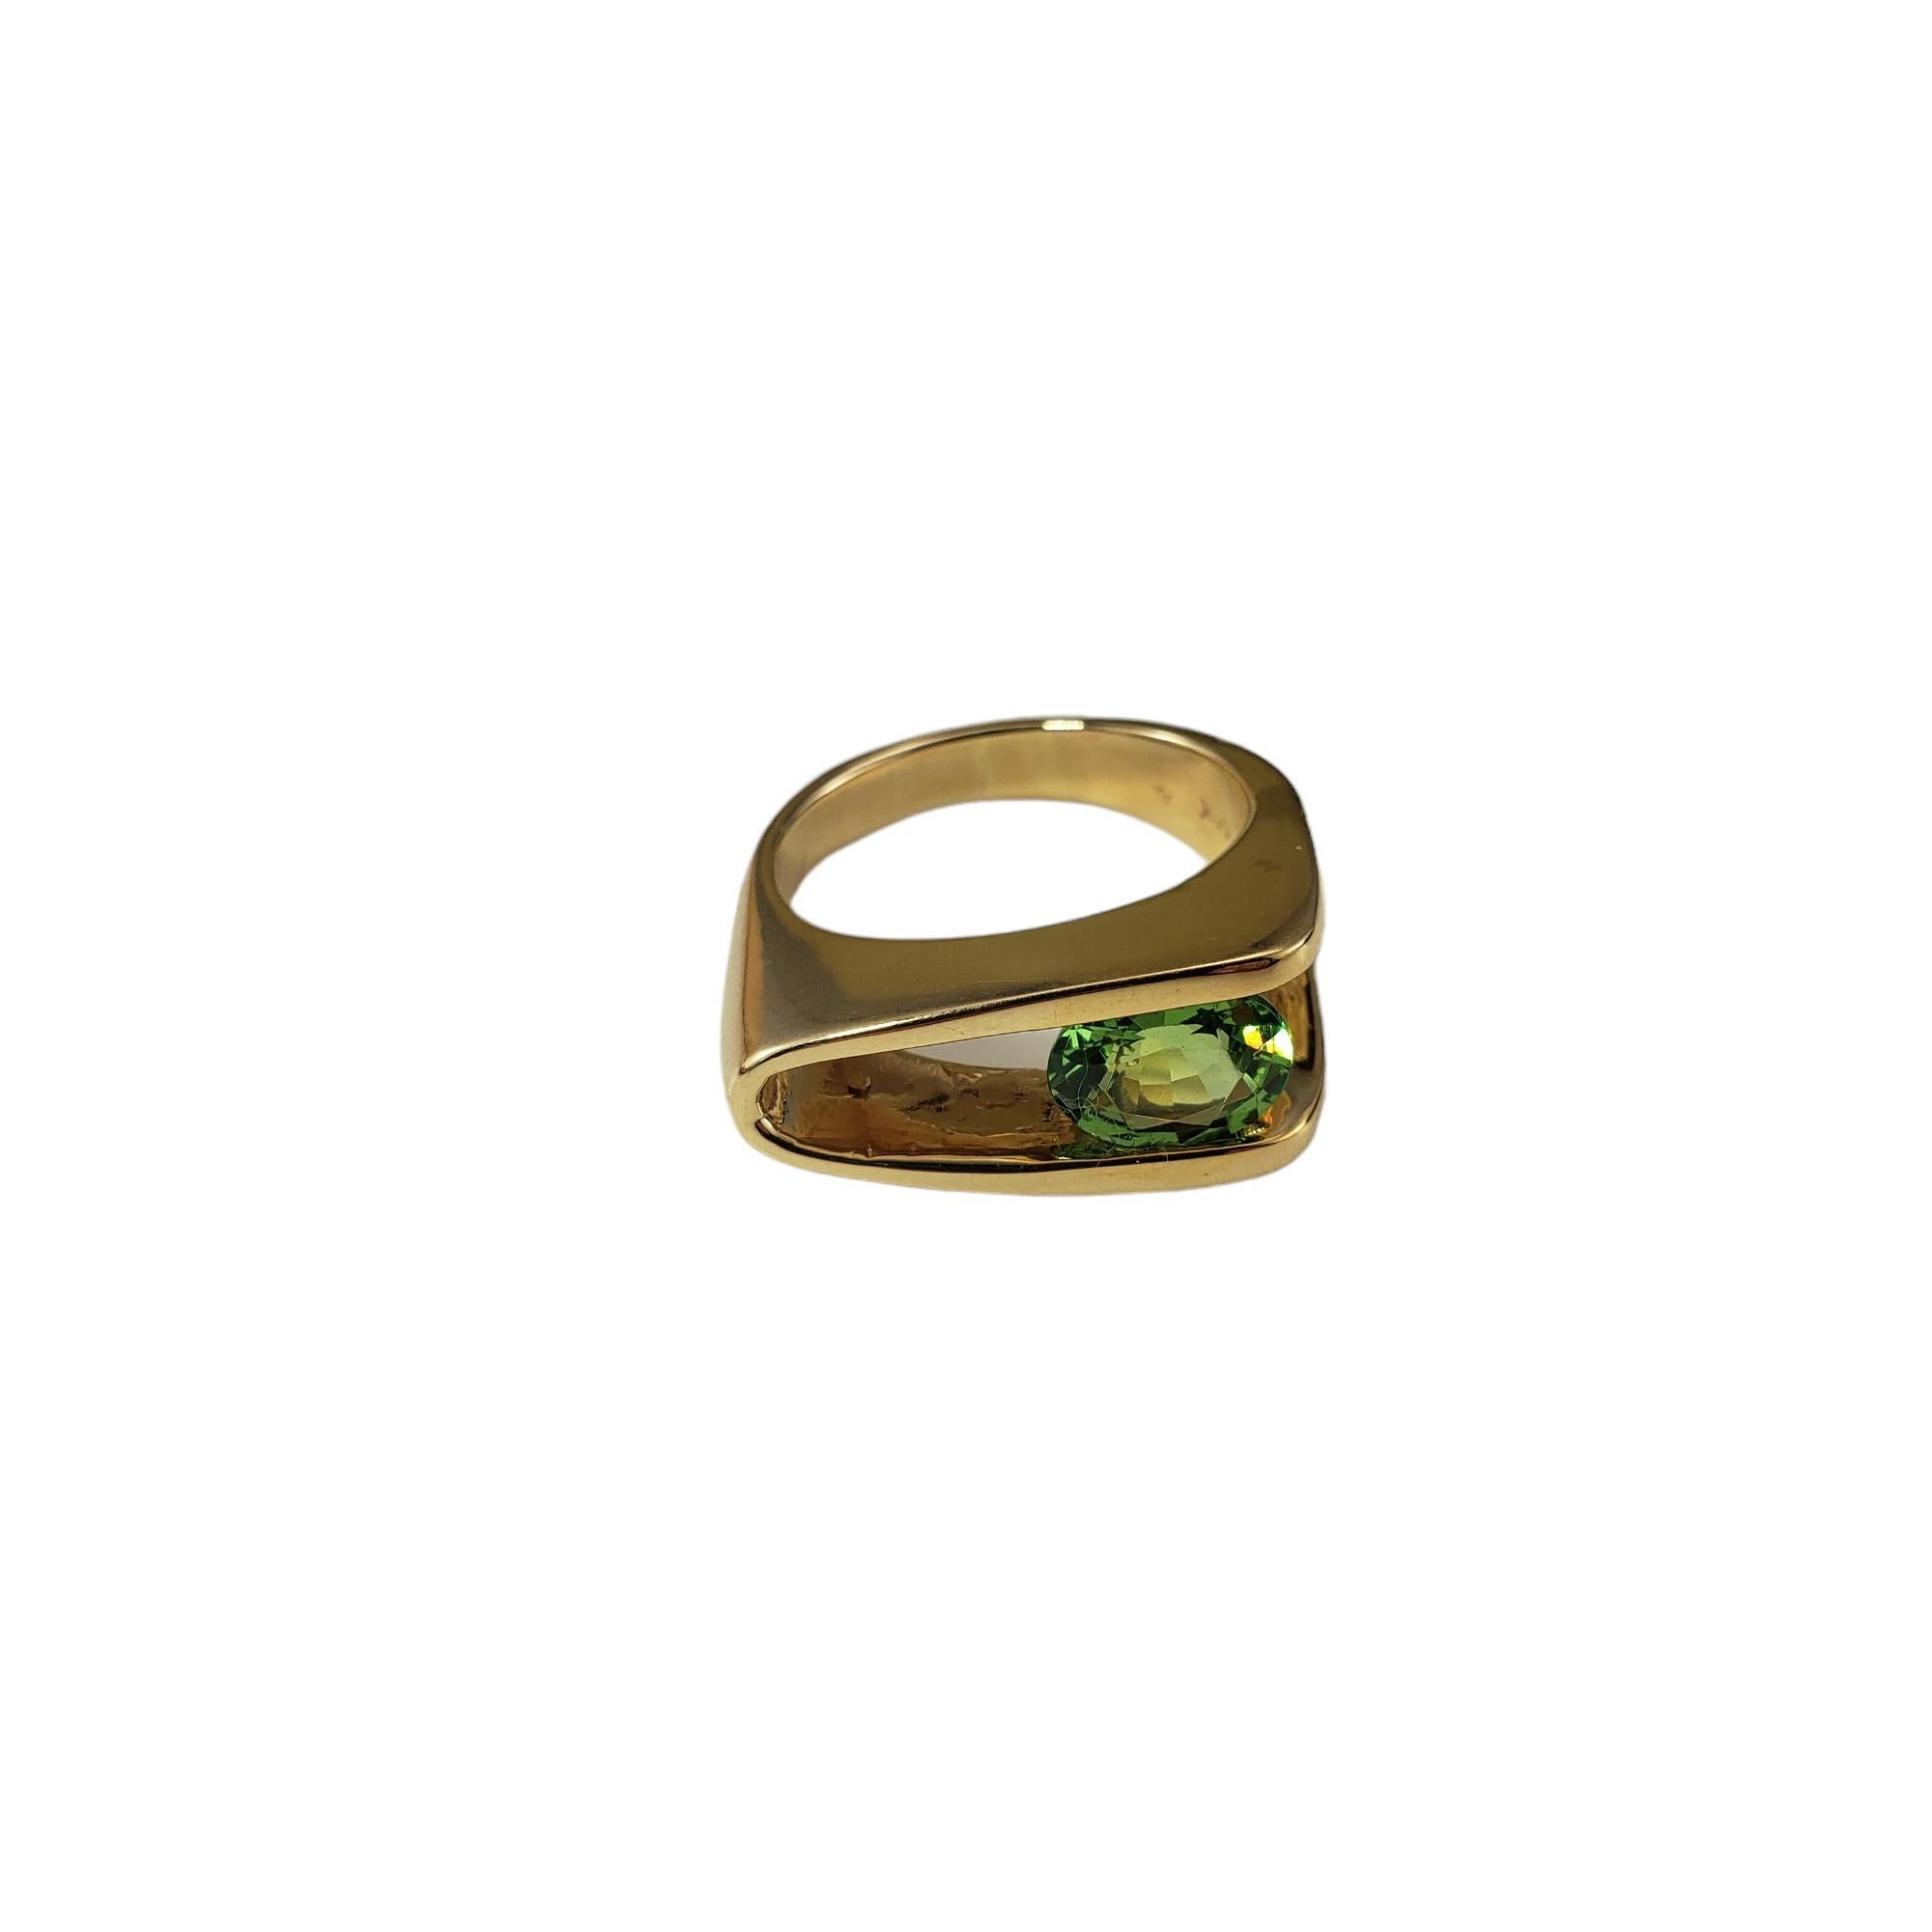 14K Yellow Gold Tsavorite Garnet Ring Size 8

This elegant ring features one oval tsavorite garnet gemstone (8 mm x 6 mm) set in classic 14K yellow gold.  

Width: 10 mm.  Shank: 3 mm.

Ring Size: 8

Stamped: 14K

Weight: 6.1 dwt./ 9.4 gr.

Very